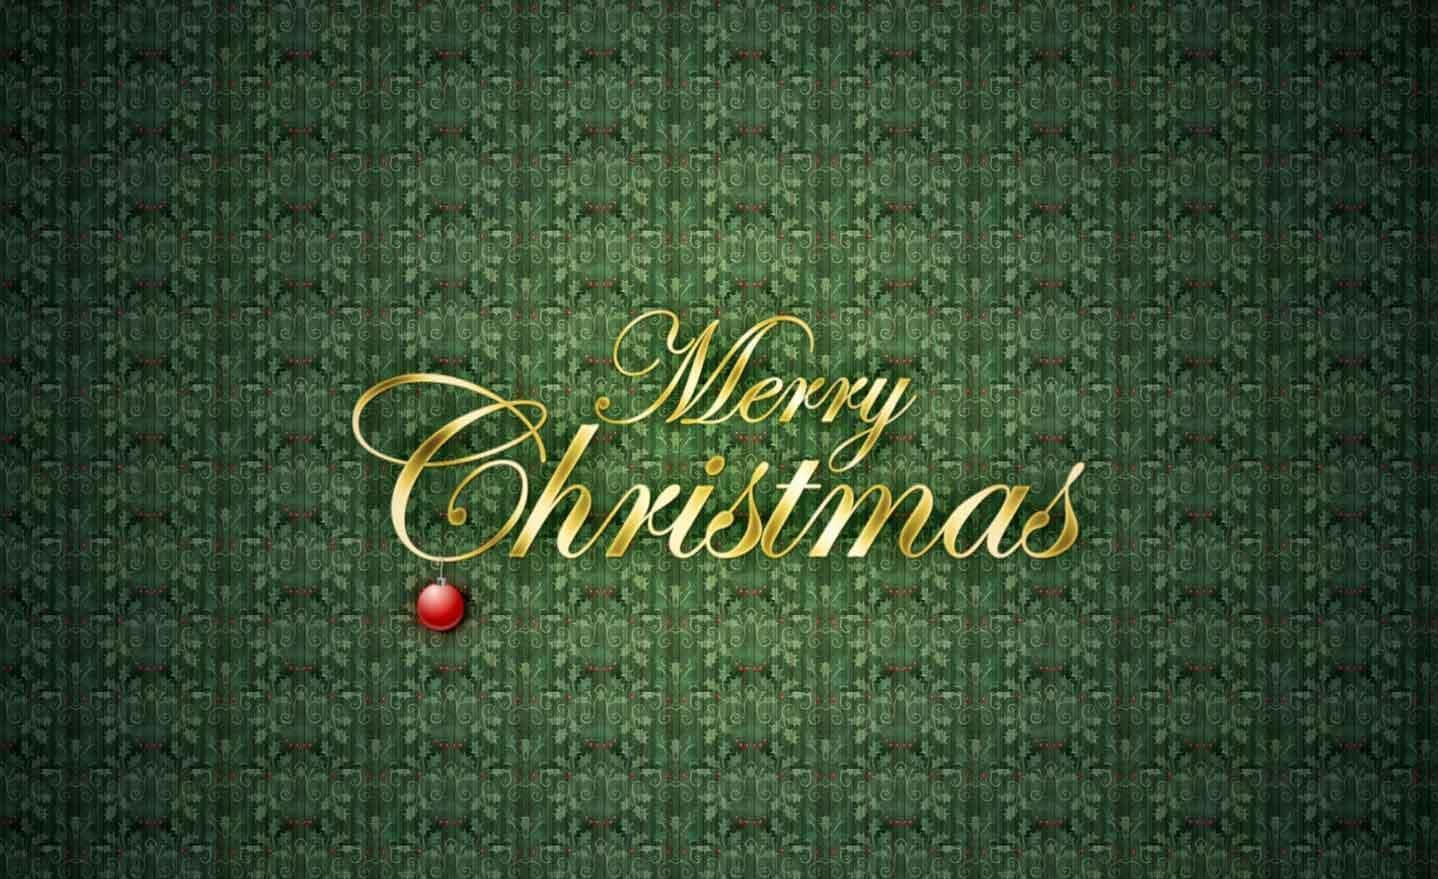 Merry Christmas Background With Gold Lettering